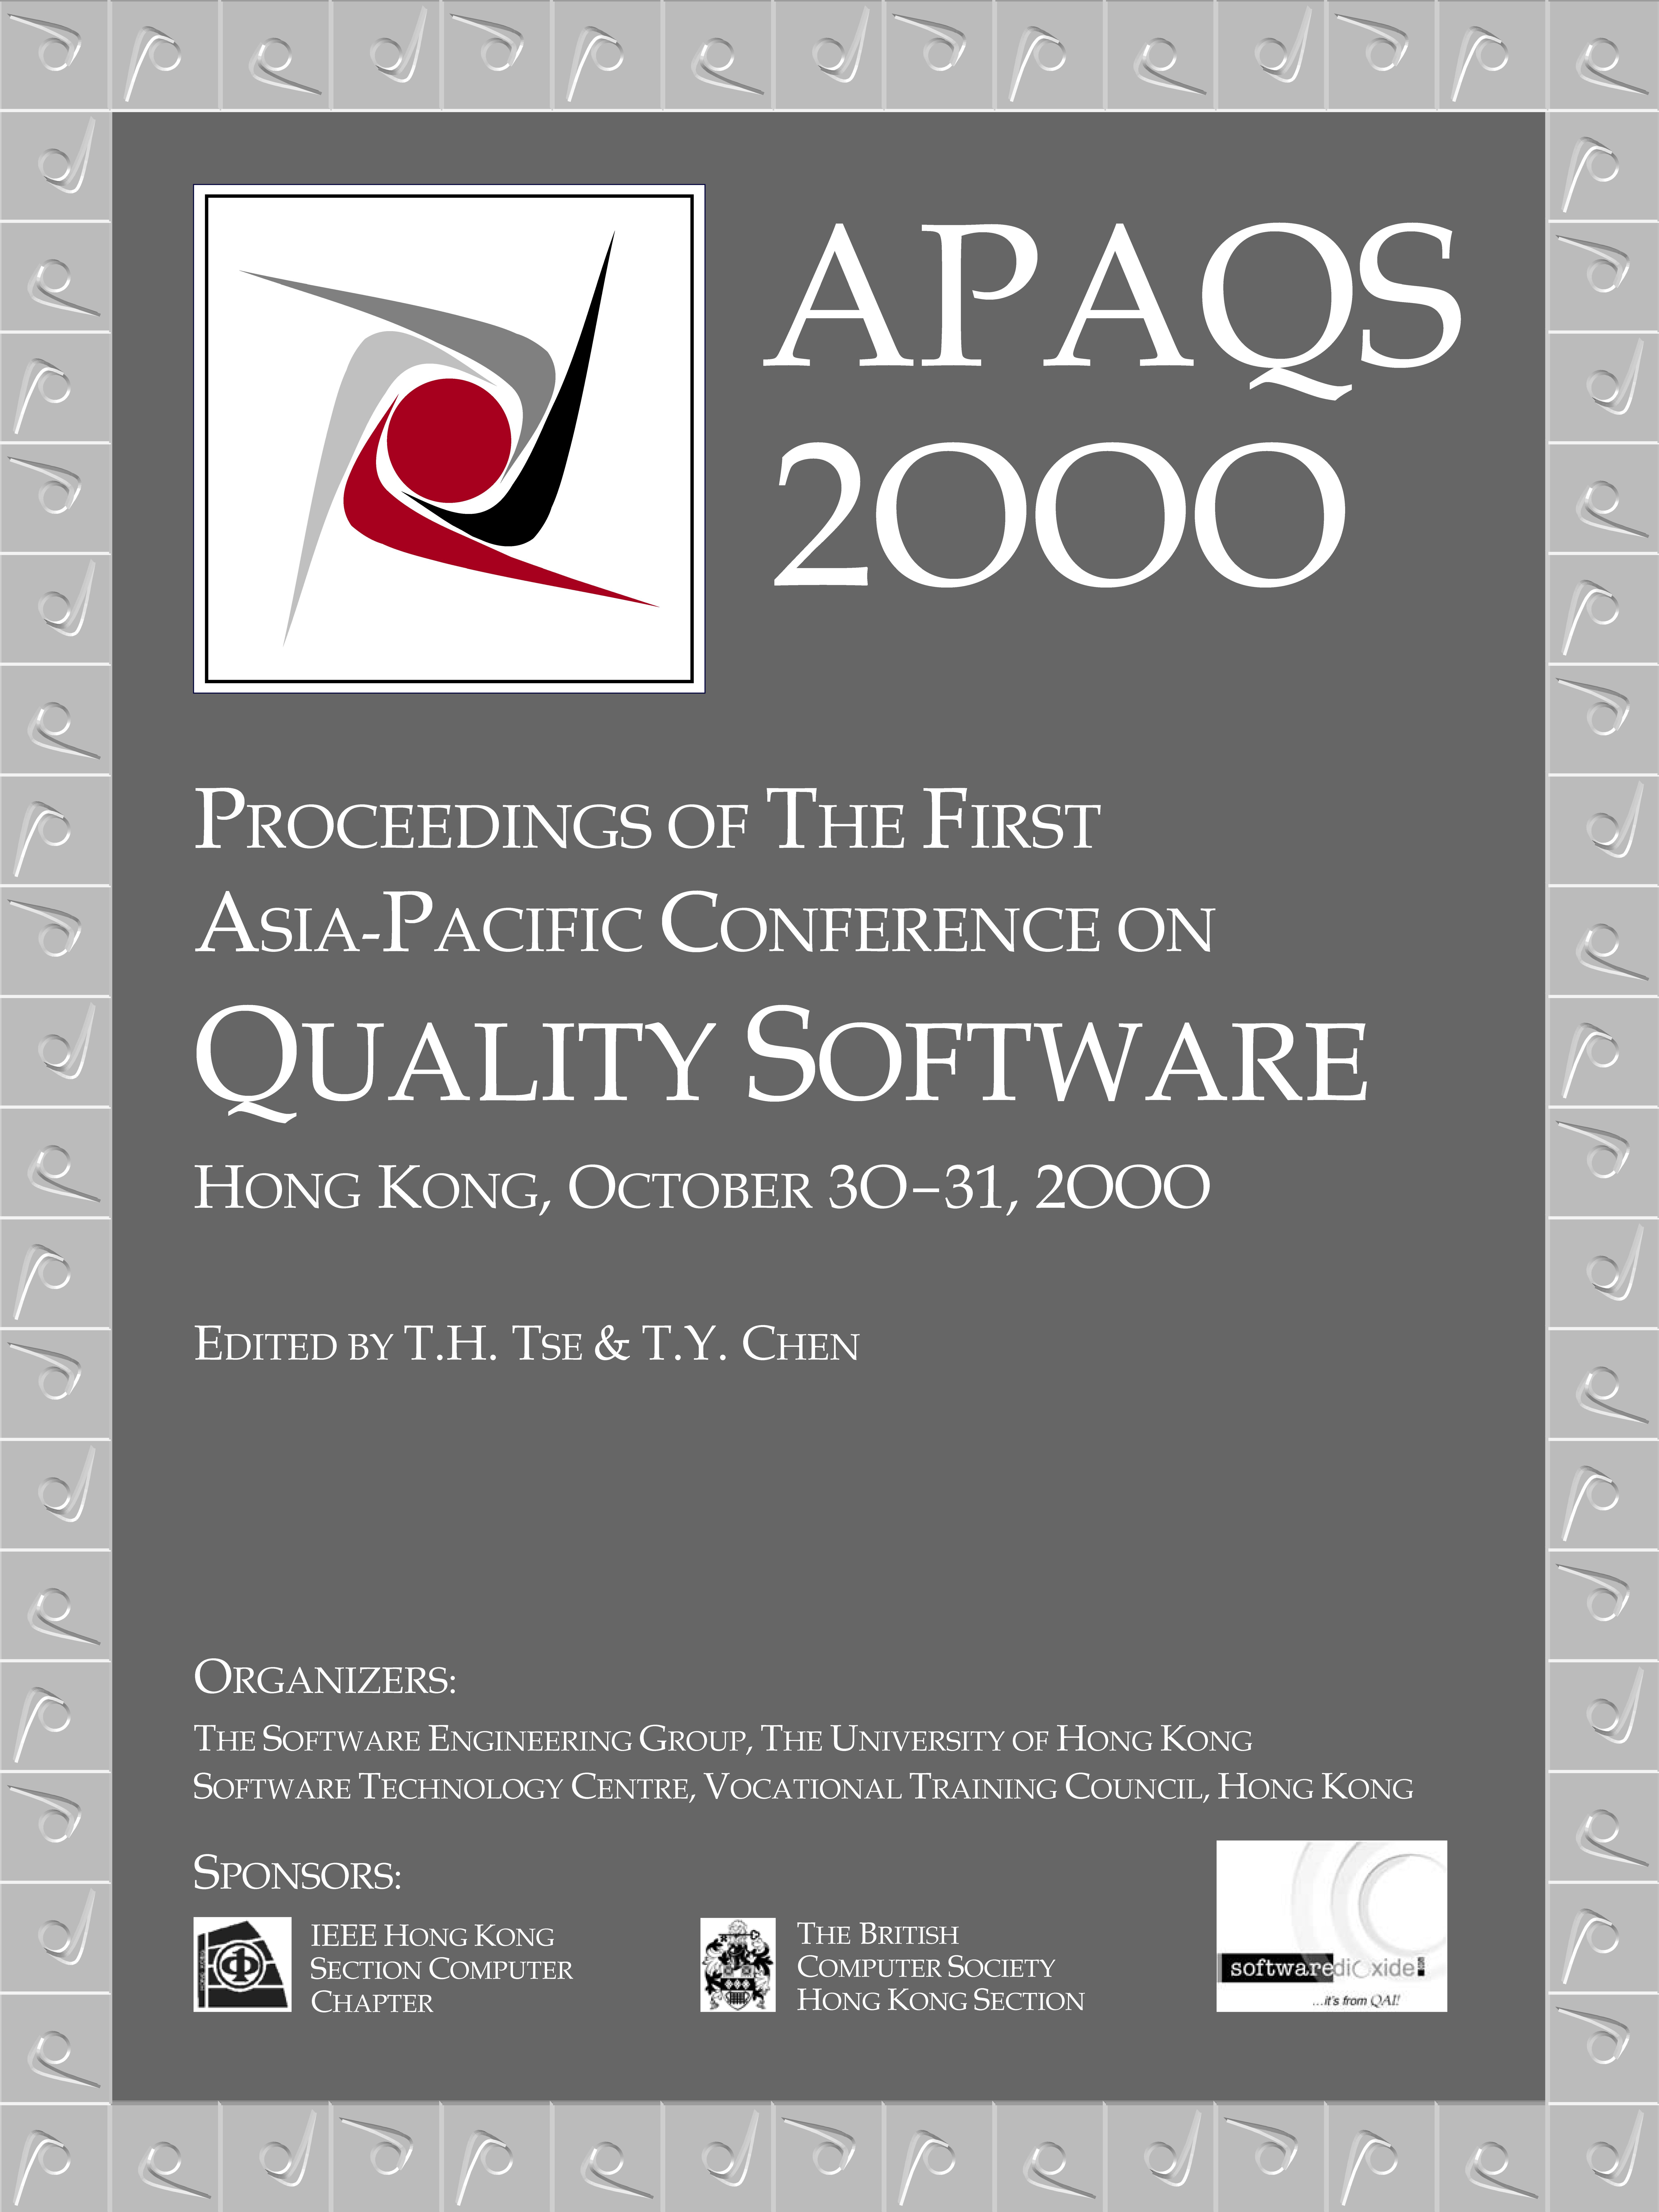 Click to enlarge the cover of the Proceedings of APAQS 2000